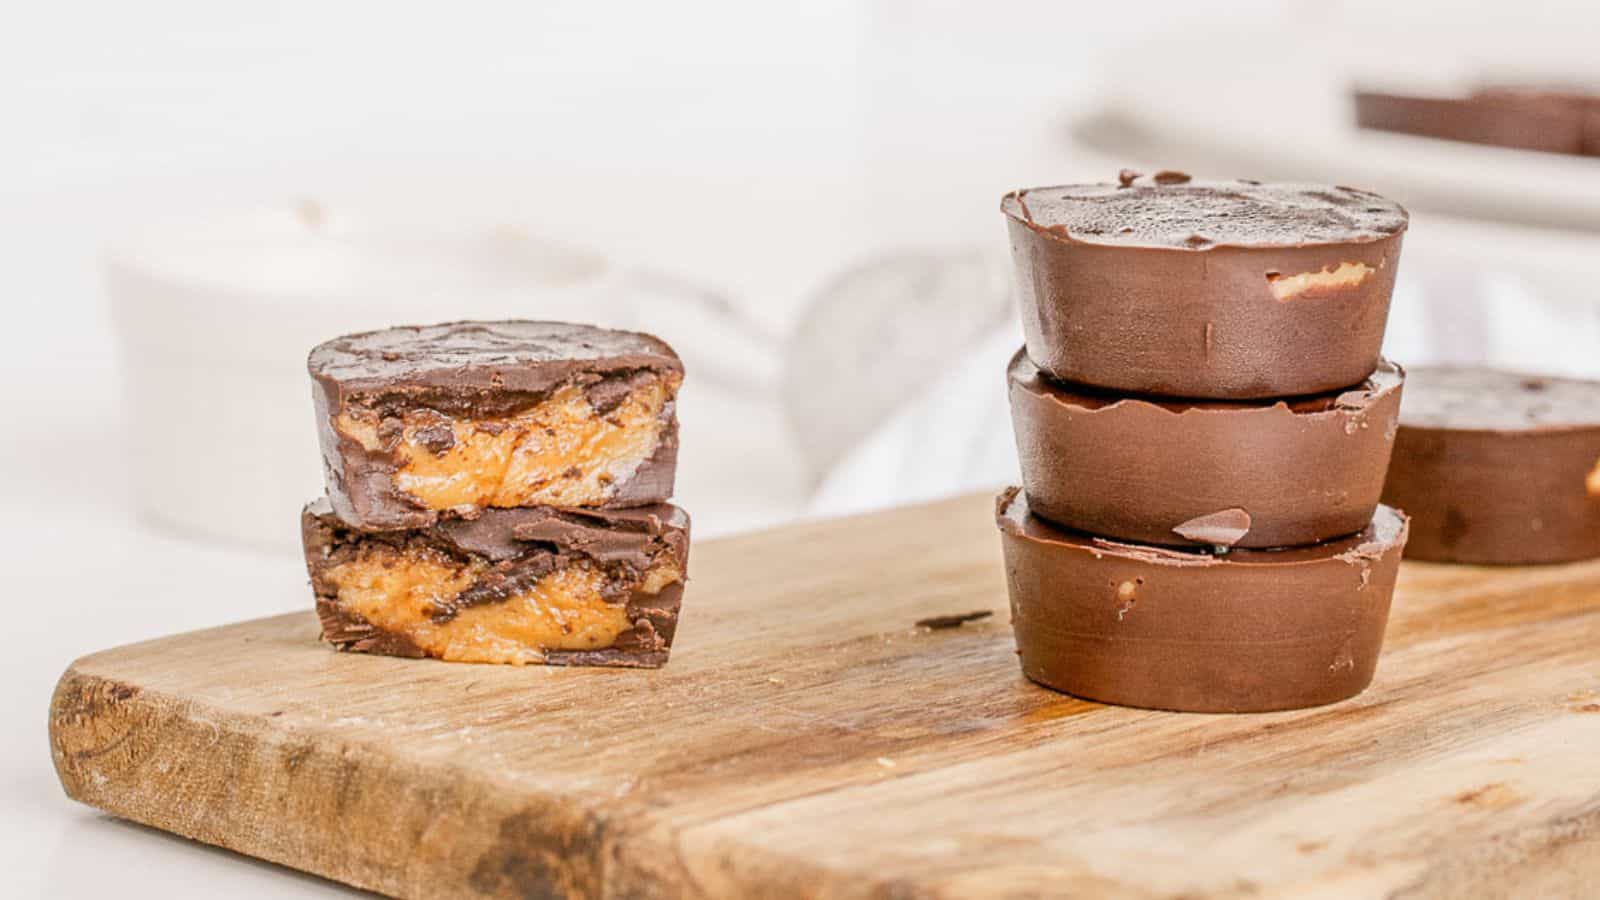 <p>Alright, brace yourself for a dessert that’s out of this world – our vegan chocolate peanut butter cups! Whether you’re a vegan or just a peanut butter fanatic, these cups are sure to satisfy your sweet tooth cravings. And the best part? They’re so easy to make, you’ll wonder why you haven’t tried them sooner.<br><strong>Get the Recipe: </strong><a href="https://twocityvegans.com/easy-vegan-chocolate-peanut-butter-cups/?utm_source=msn&utm_medium=page&utm_campaign=msn">Vegan Chocolate Peanut Butter Cups</a></p>